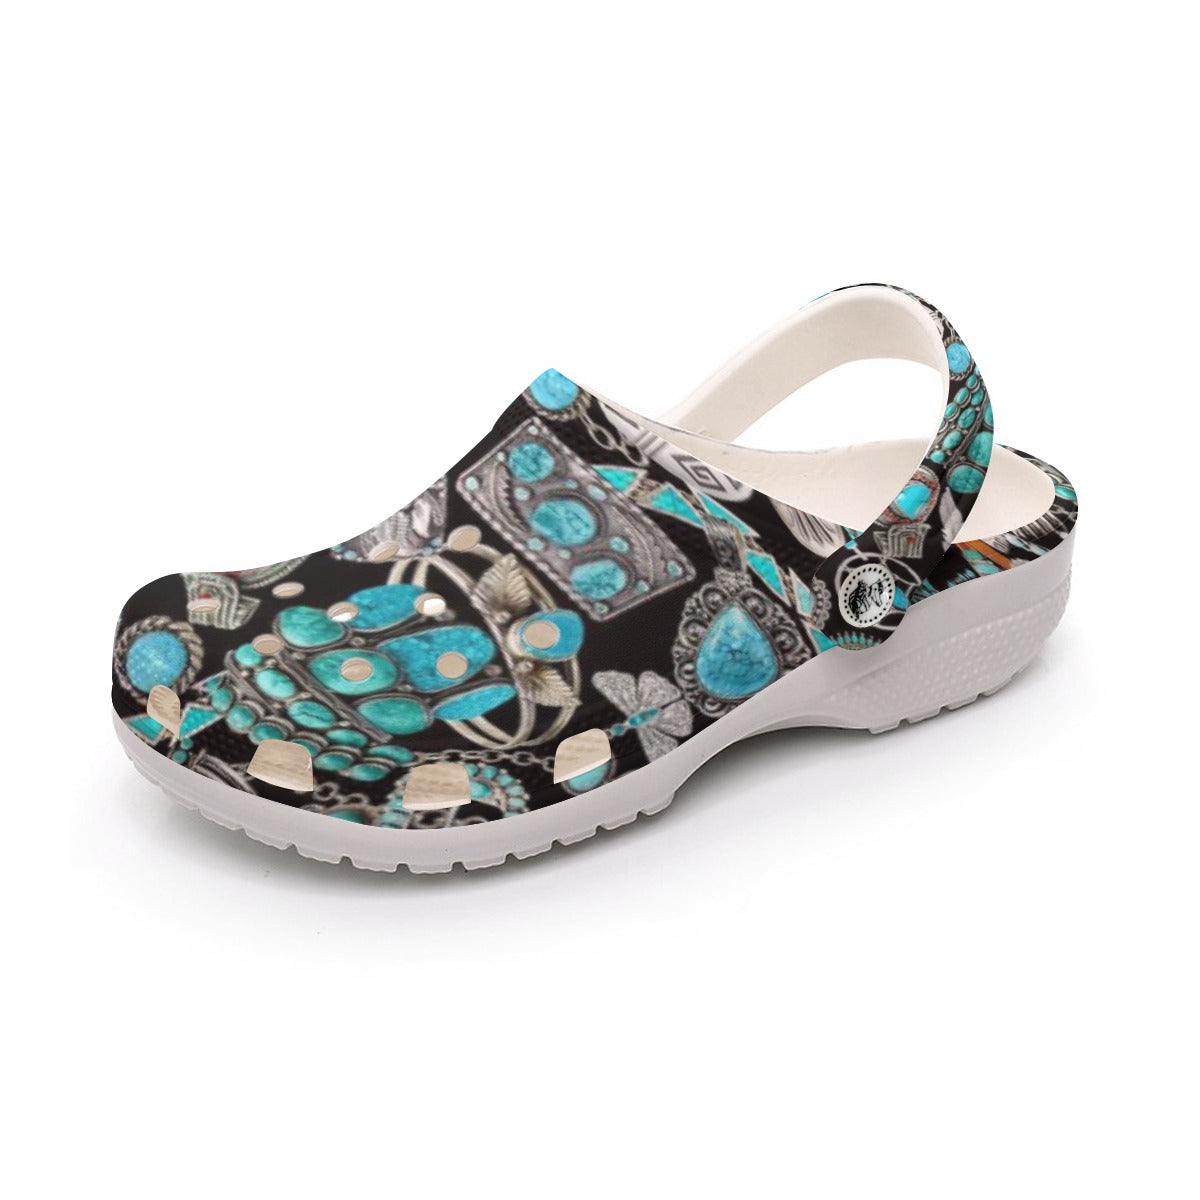 Turquoise Lovers Women's Classic Clogs